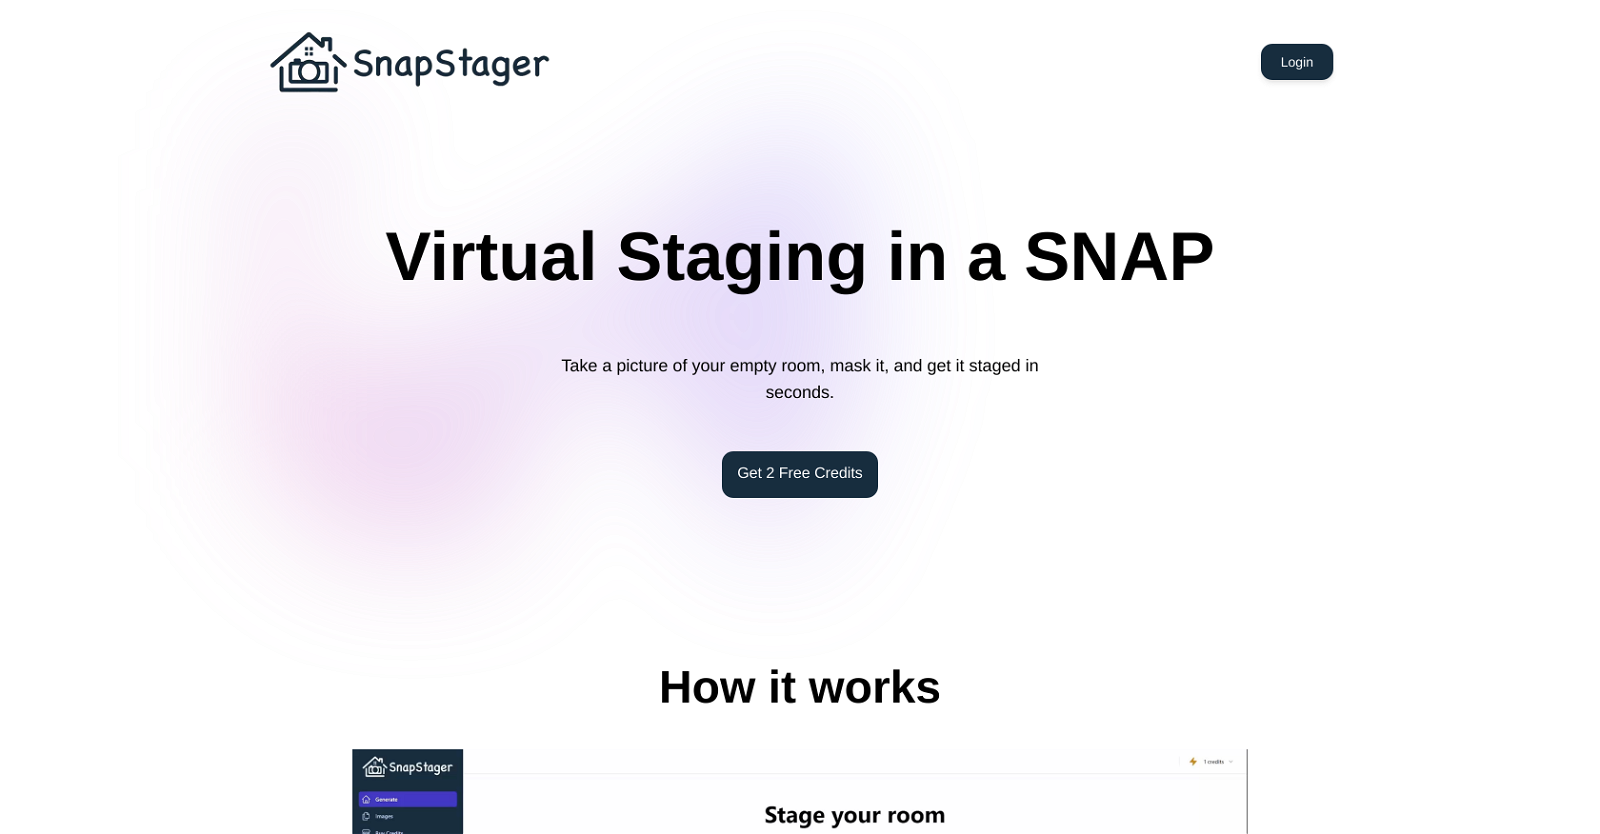 Snapstager website